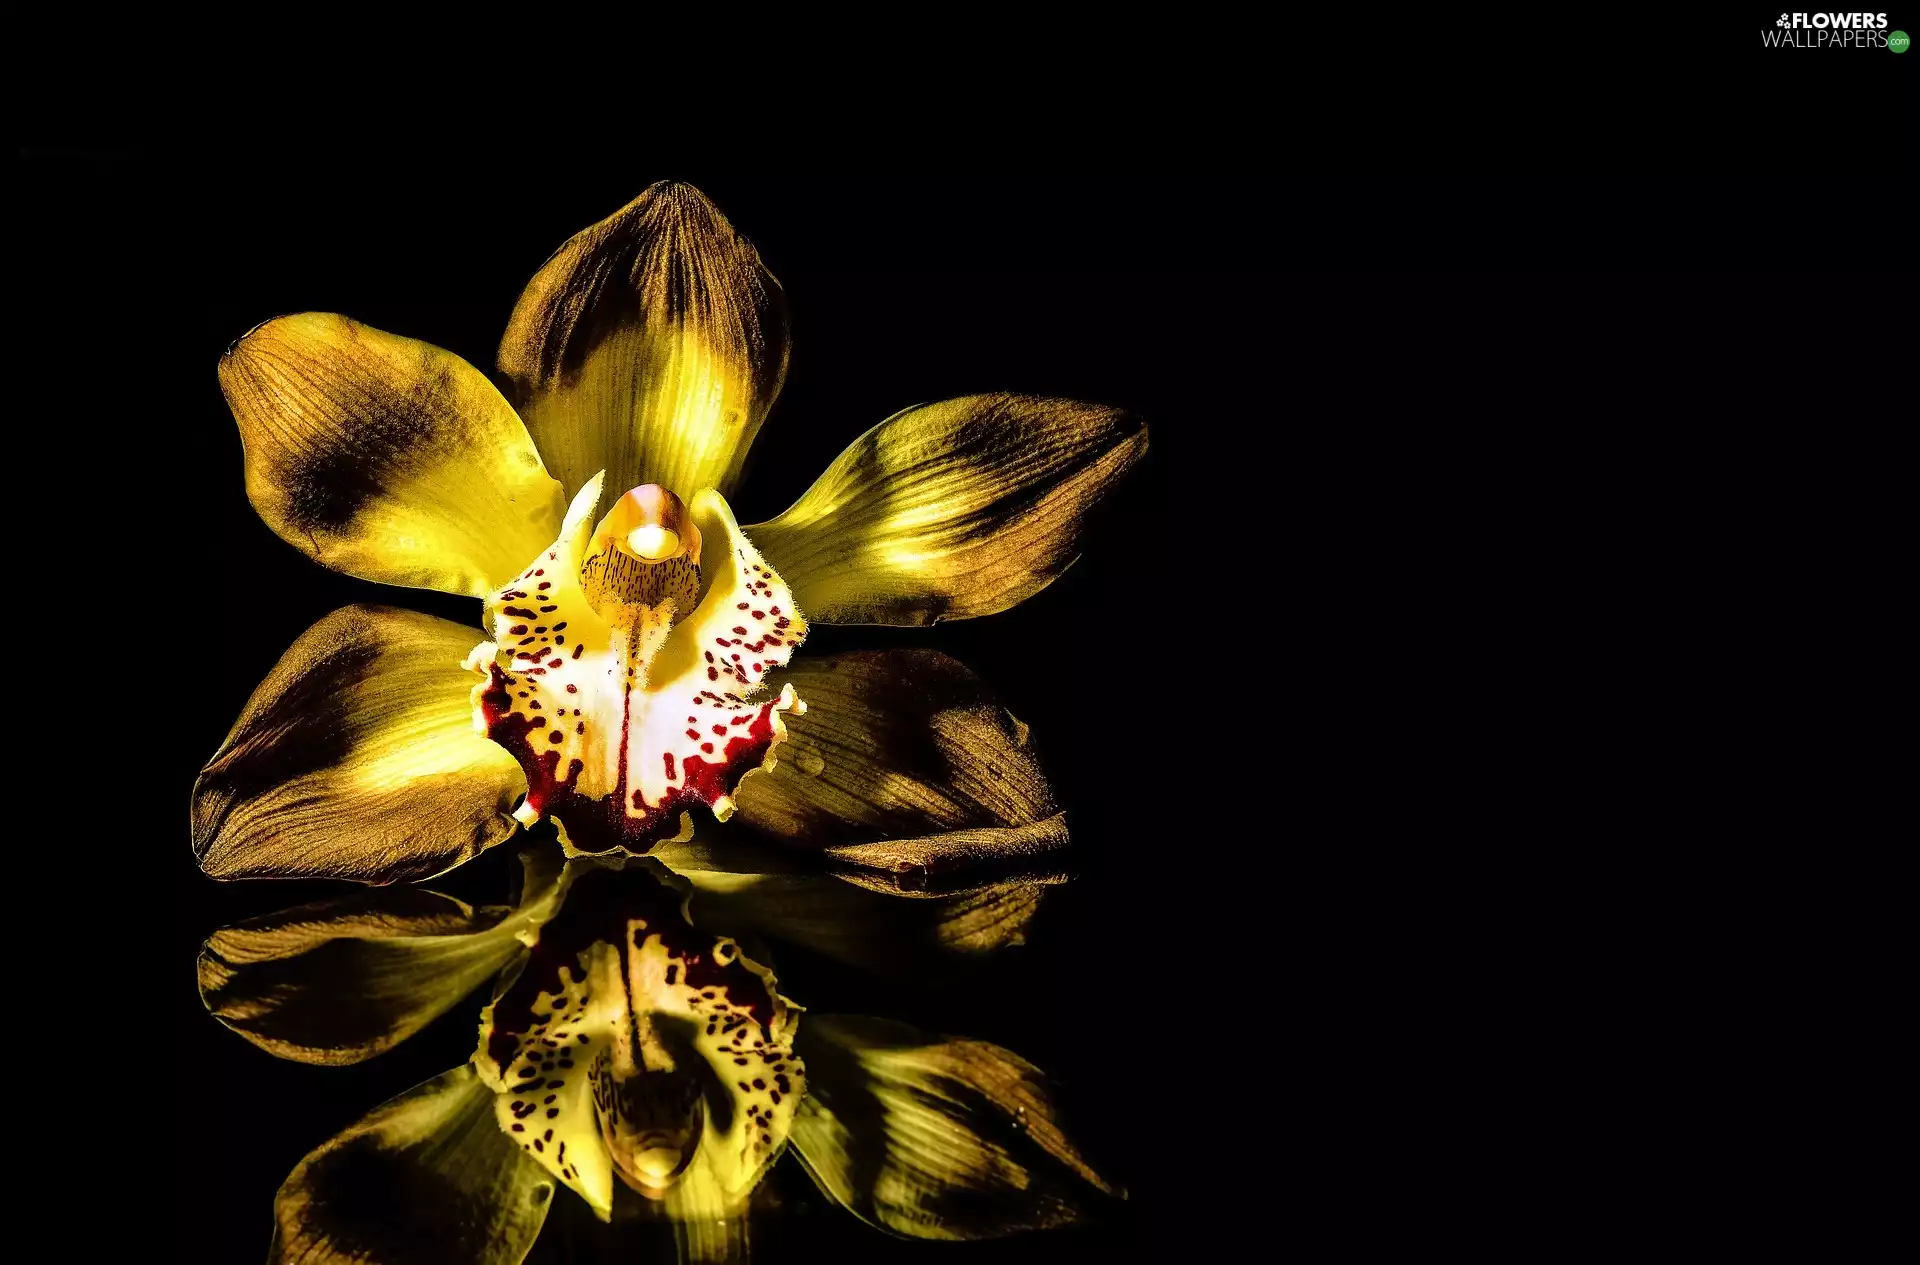 Colourfull Flowers, black background, reflection, orchid